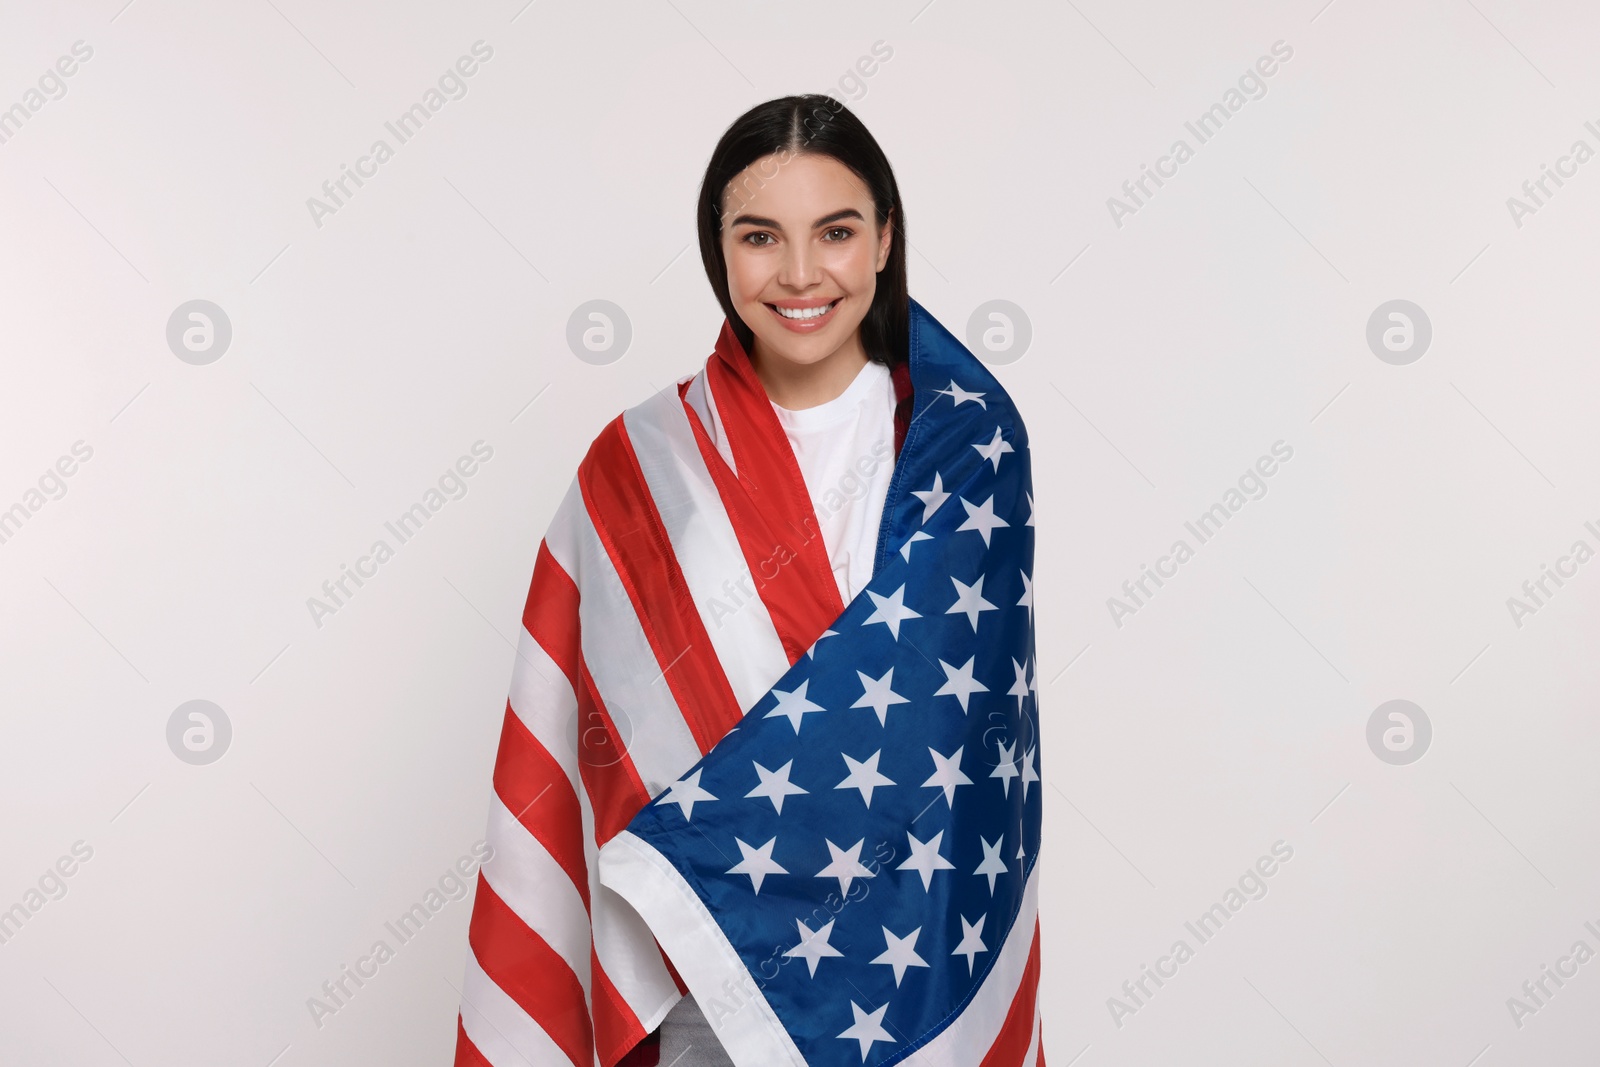 Photo of 4th of July - Independence Day of USA. Happy woman with American flag on white background